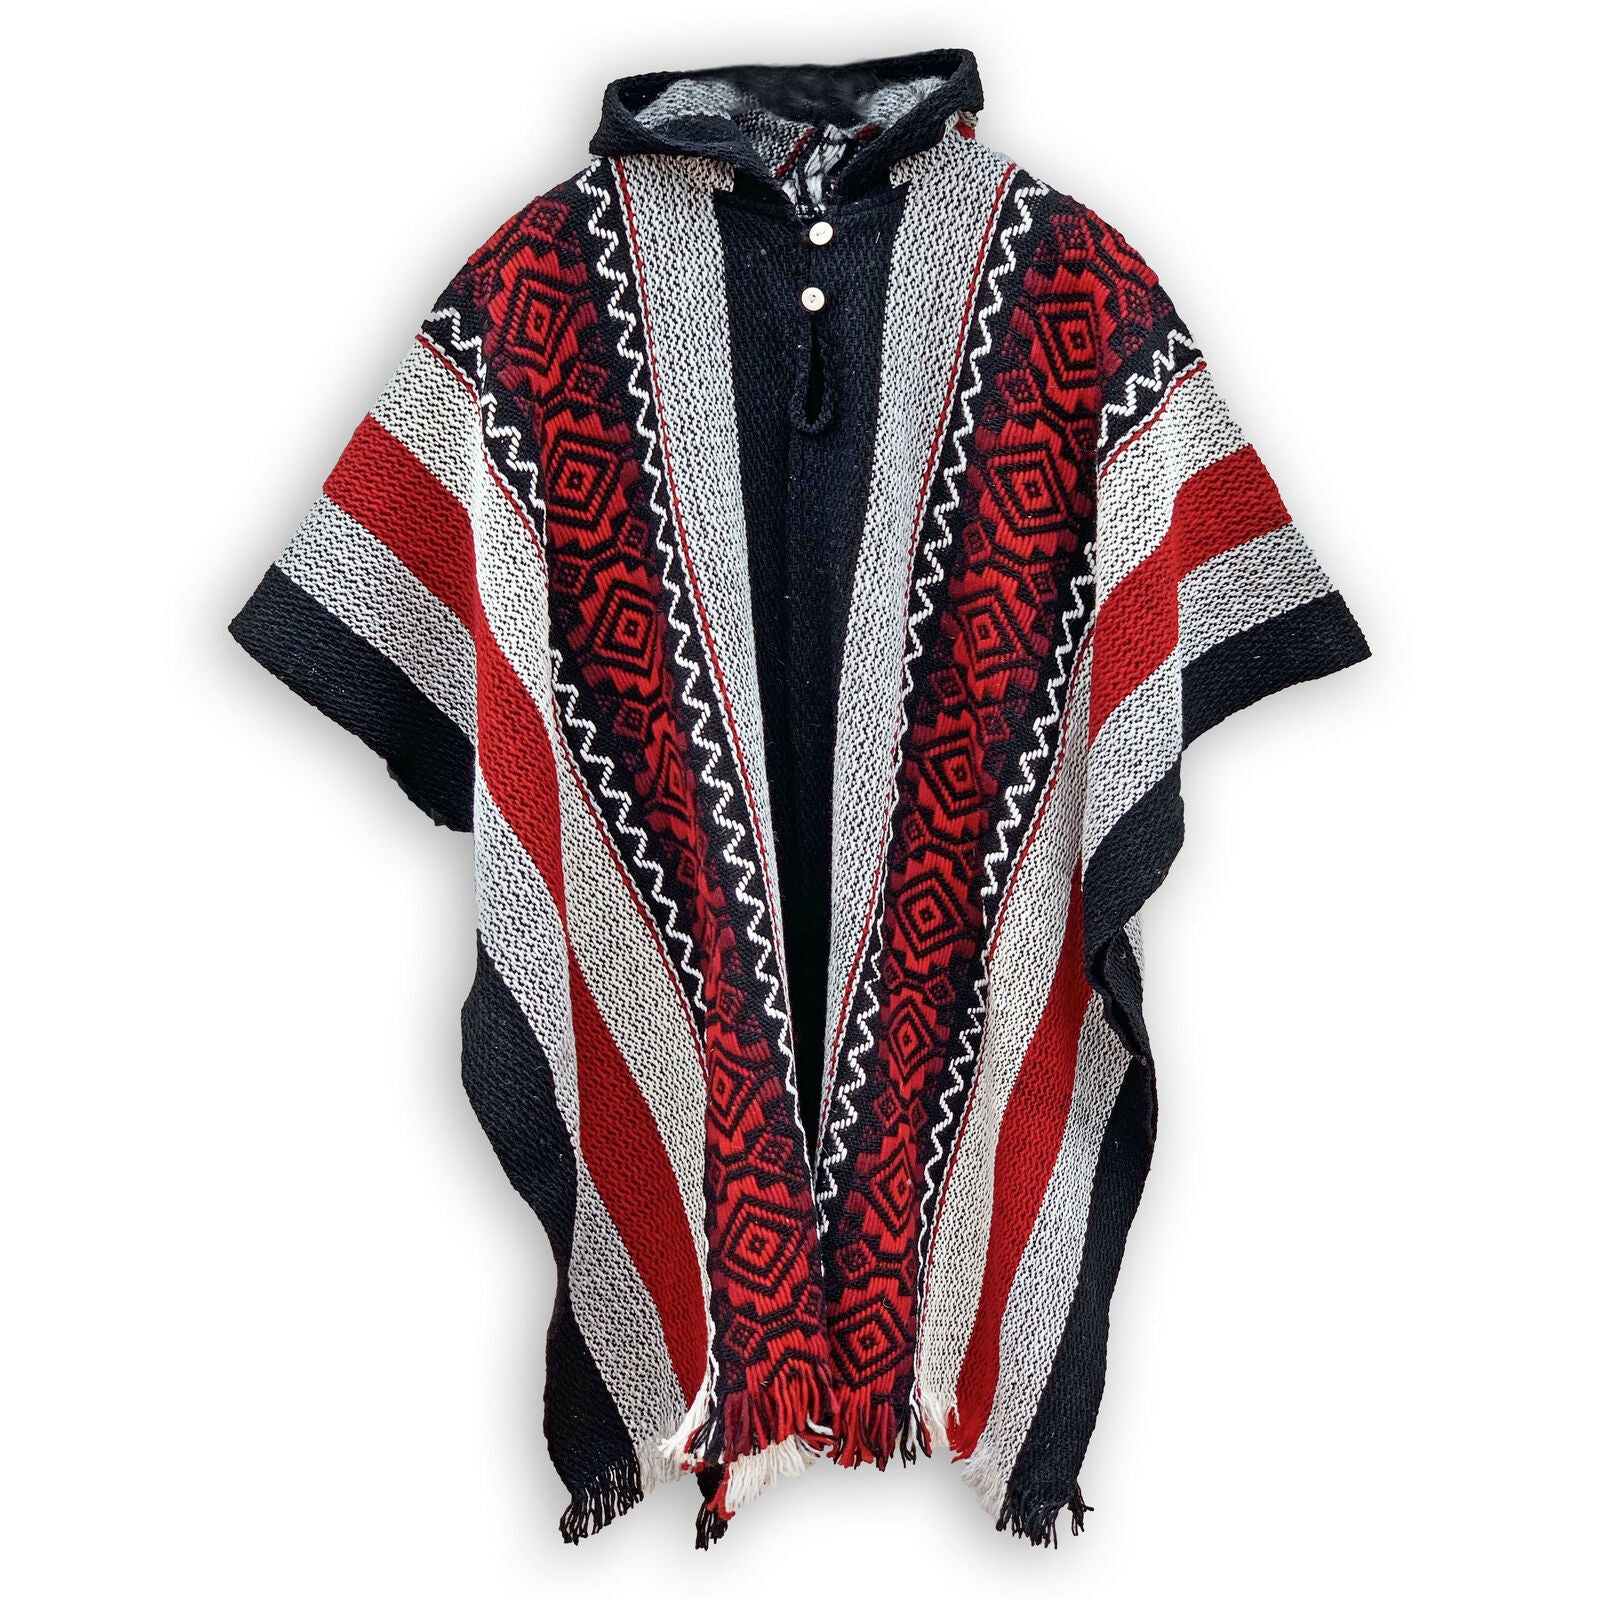 Llama Wool Unisex South American Handwoven Poncho - striped pattern BLACK/WHITE/RED with red diamonds